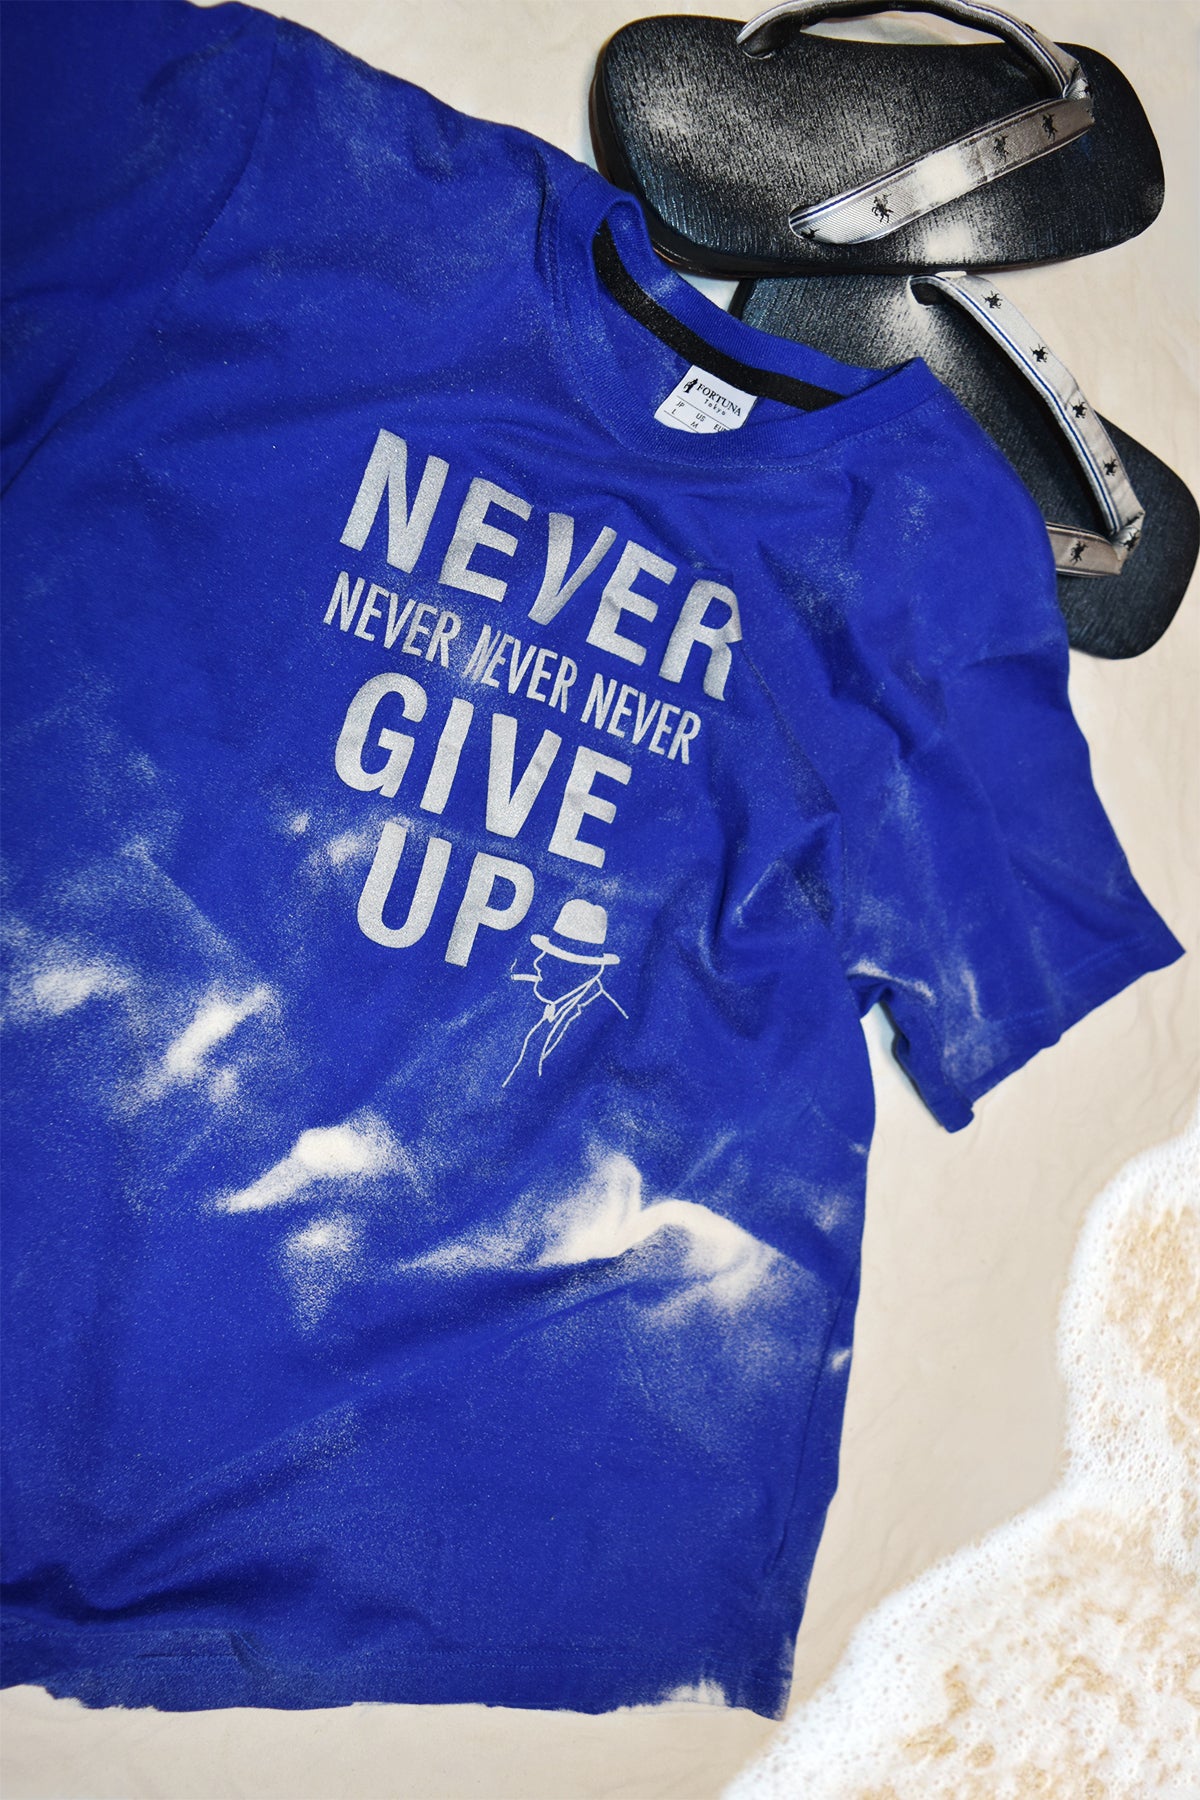 FORTUNA Tokyo Anti-virus processing T shirts unisex, Never Give Up.